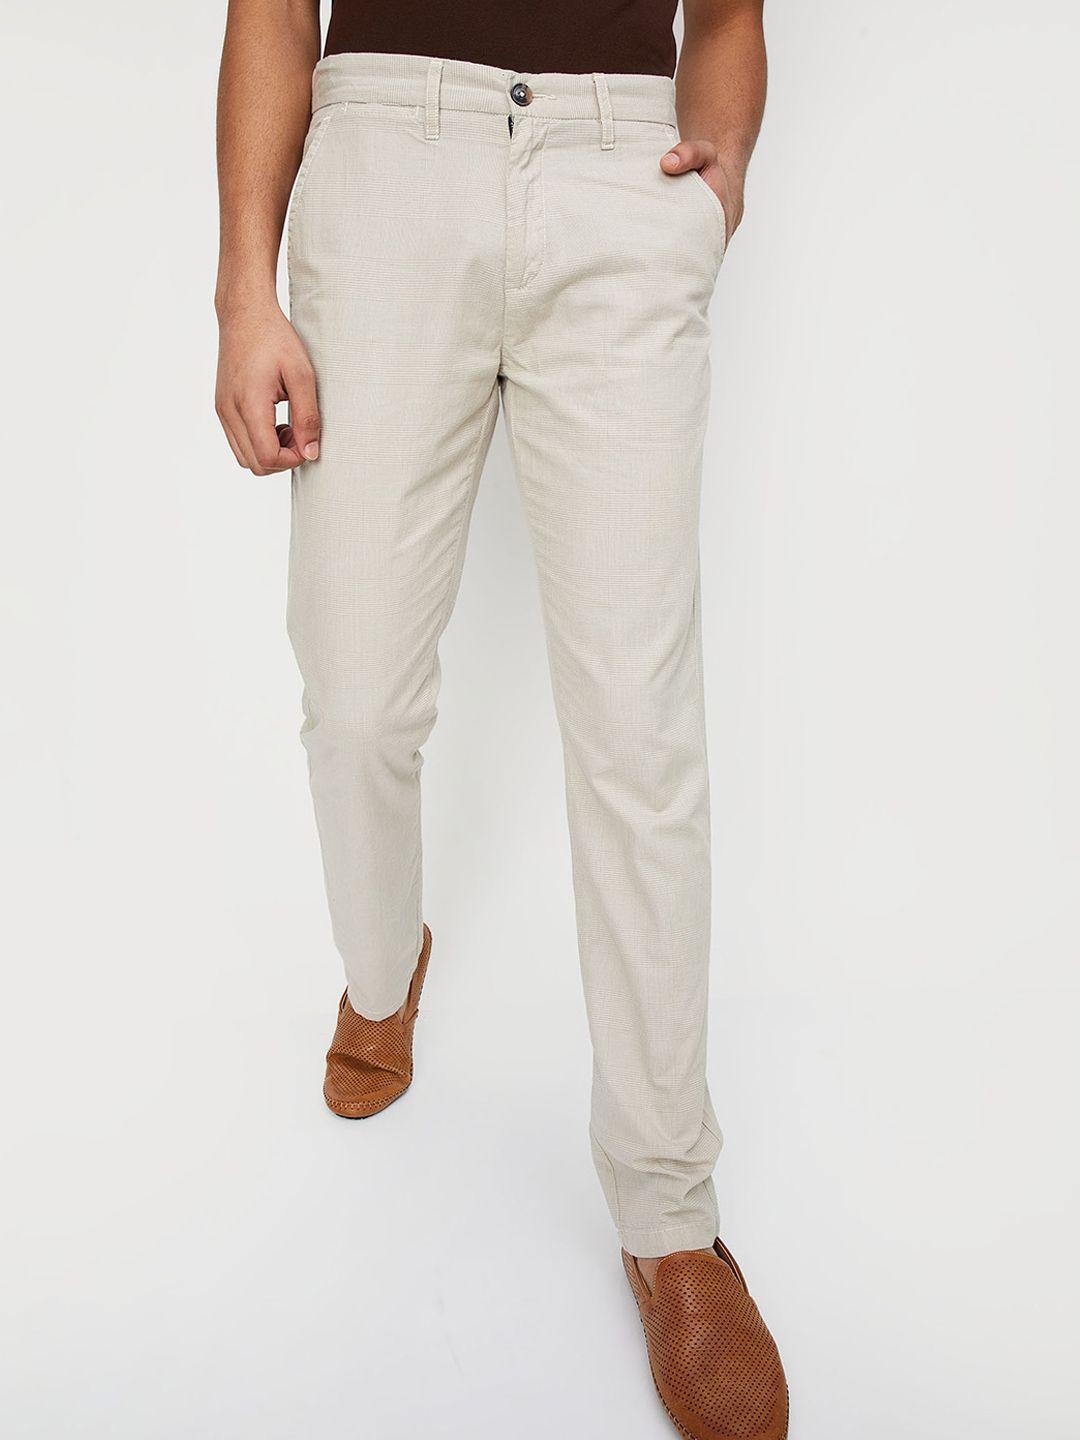 max-men-mid-rise-chinos-trousers